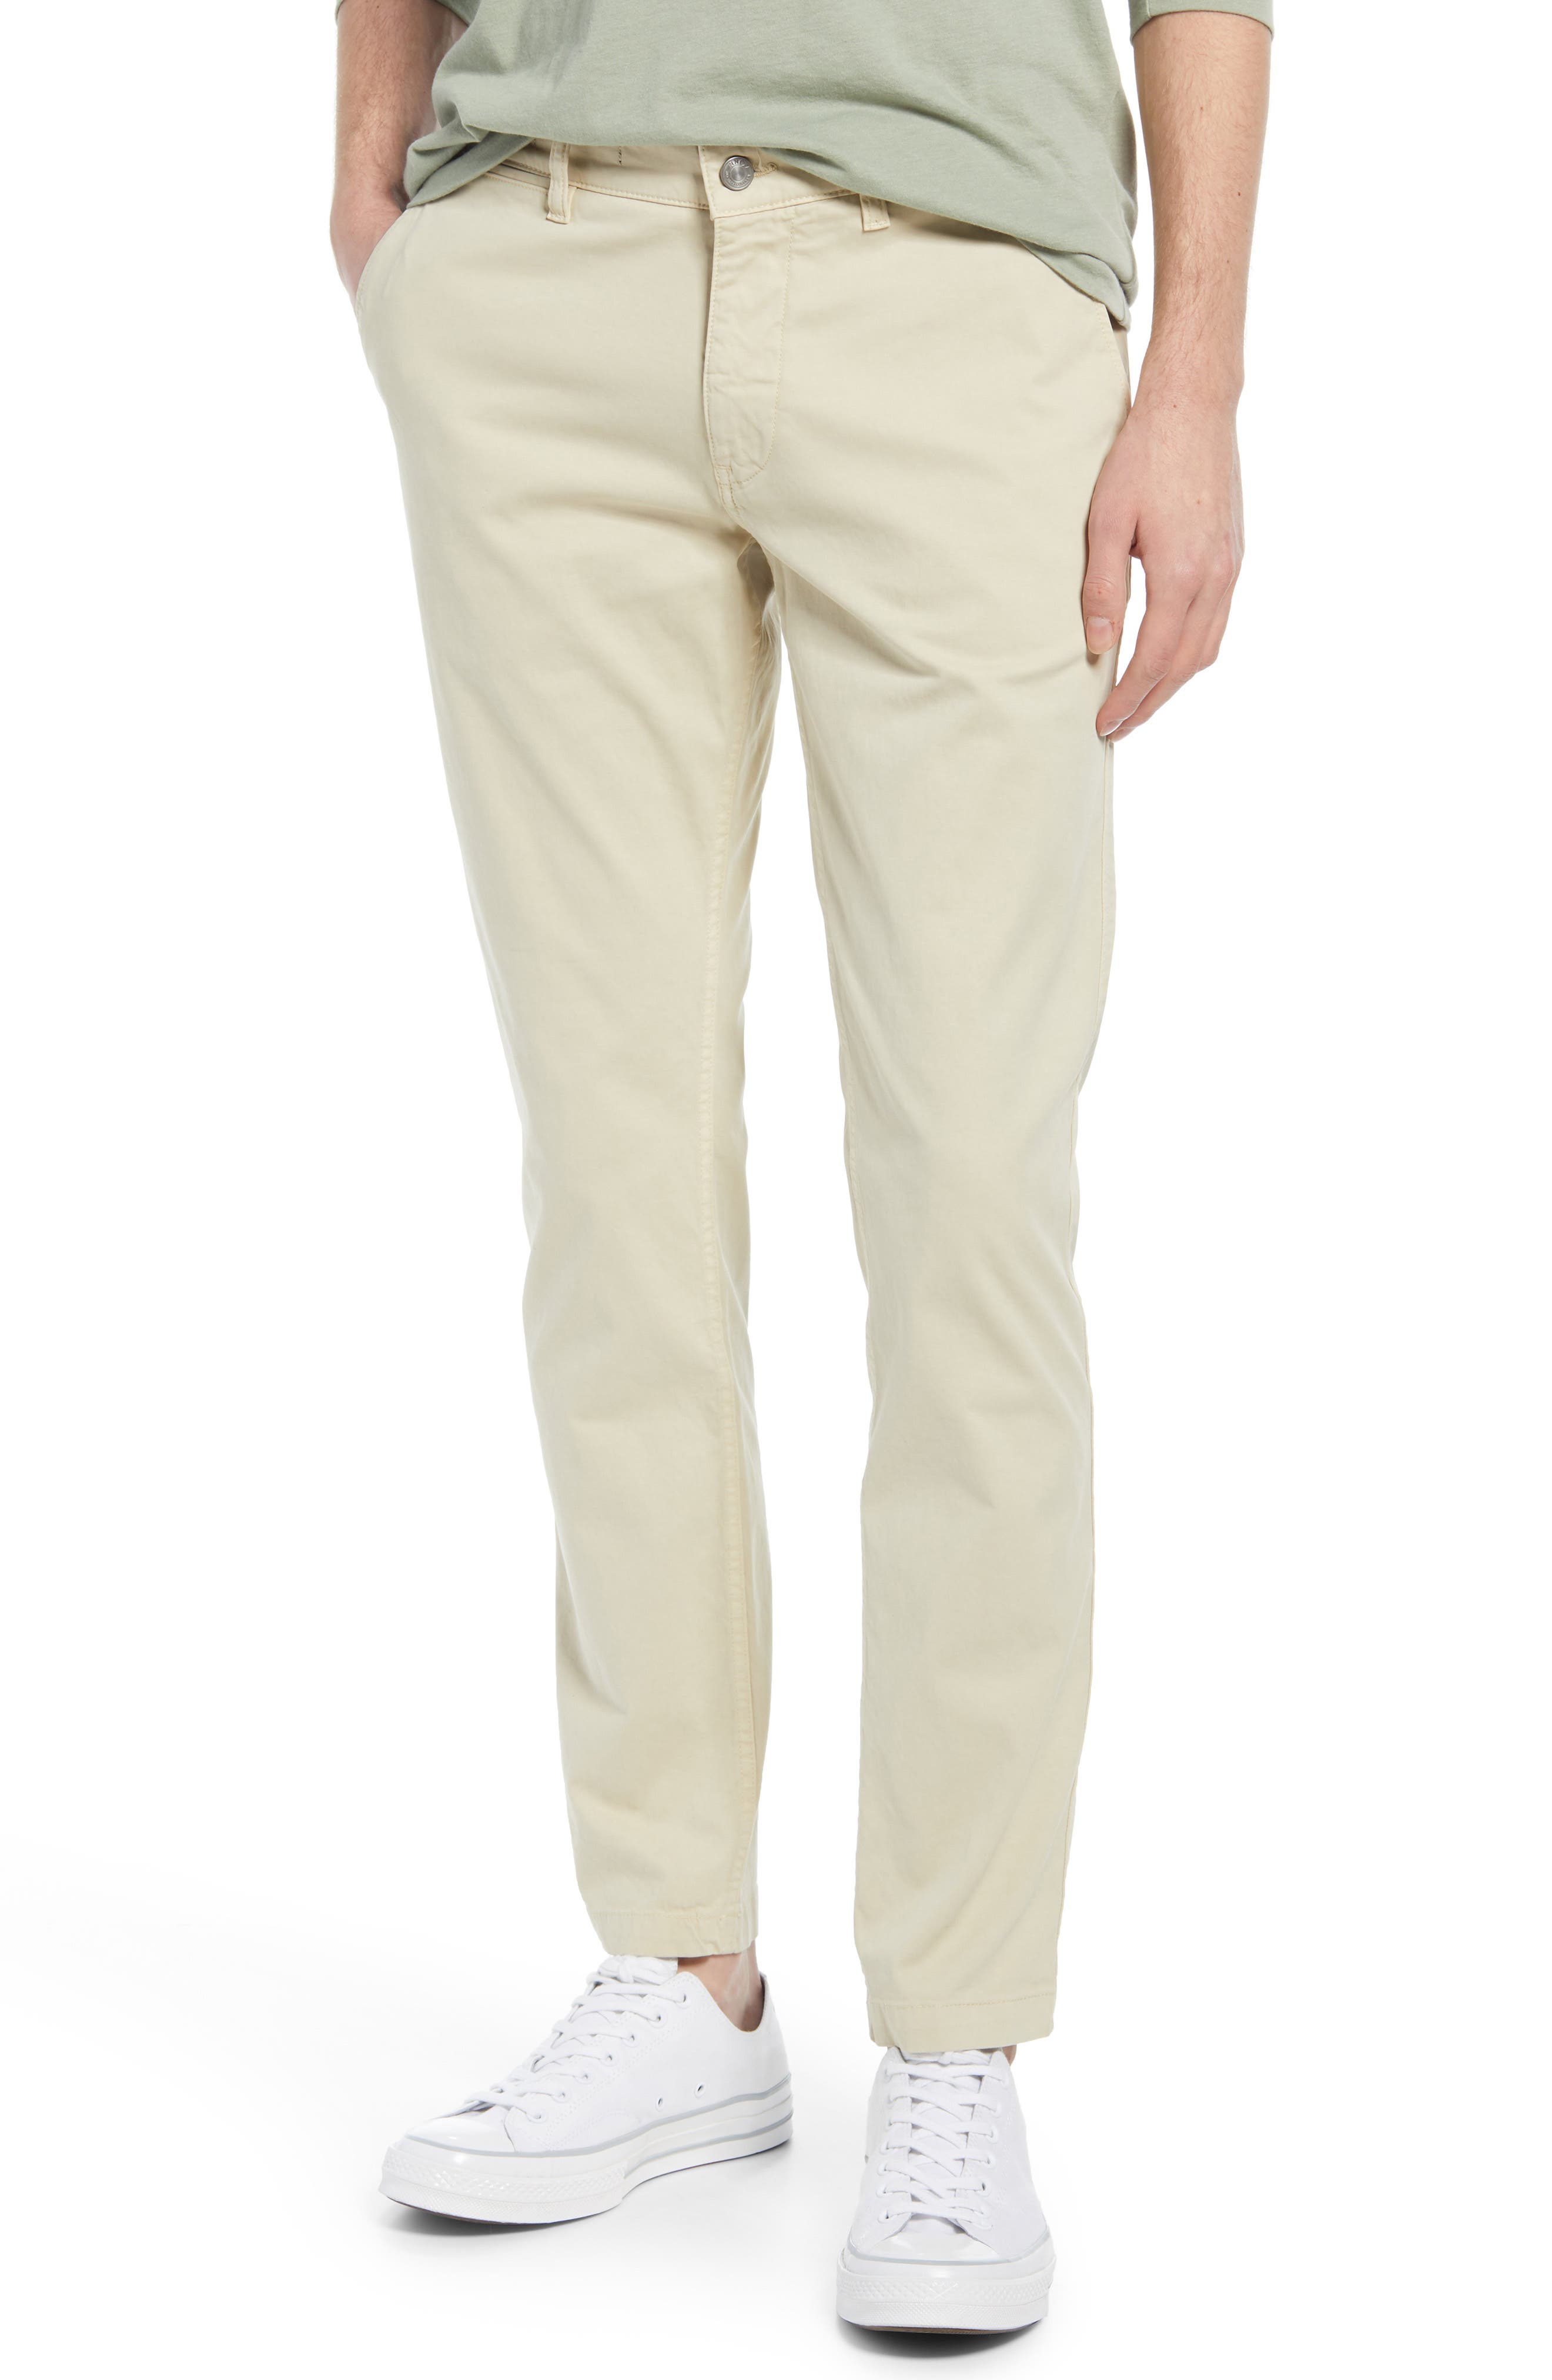 NN07 Marco 1400 Slim Fit Chinos in Sand